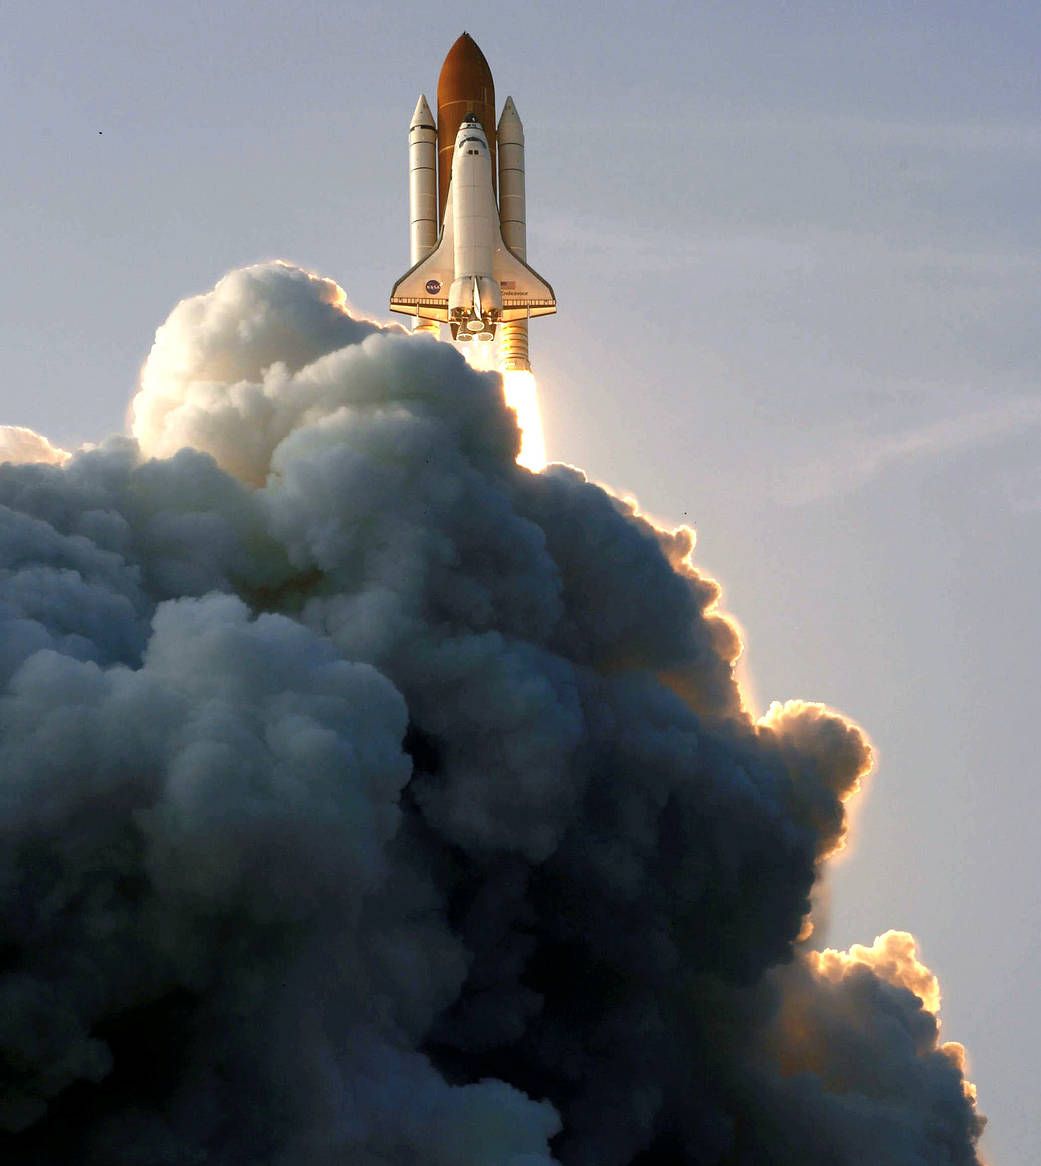 This week in 2007, space shuttle Endeavour and STS-118 launched from Kennedy Space Center.